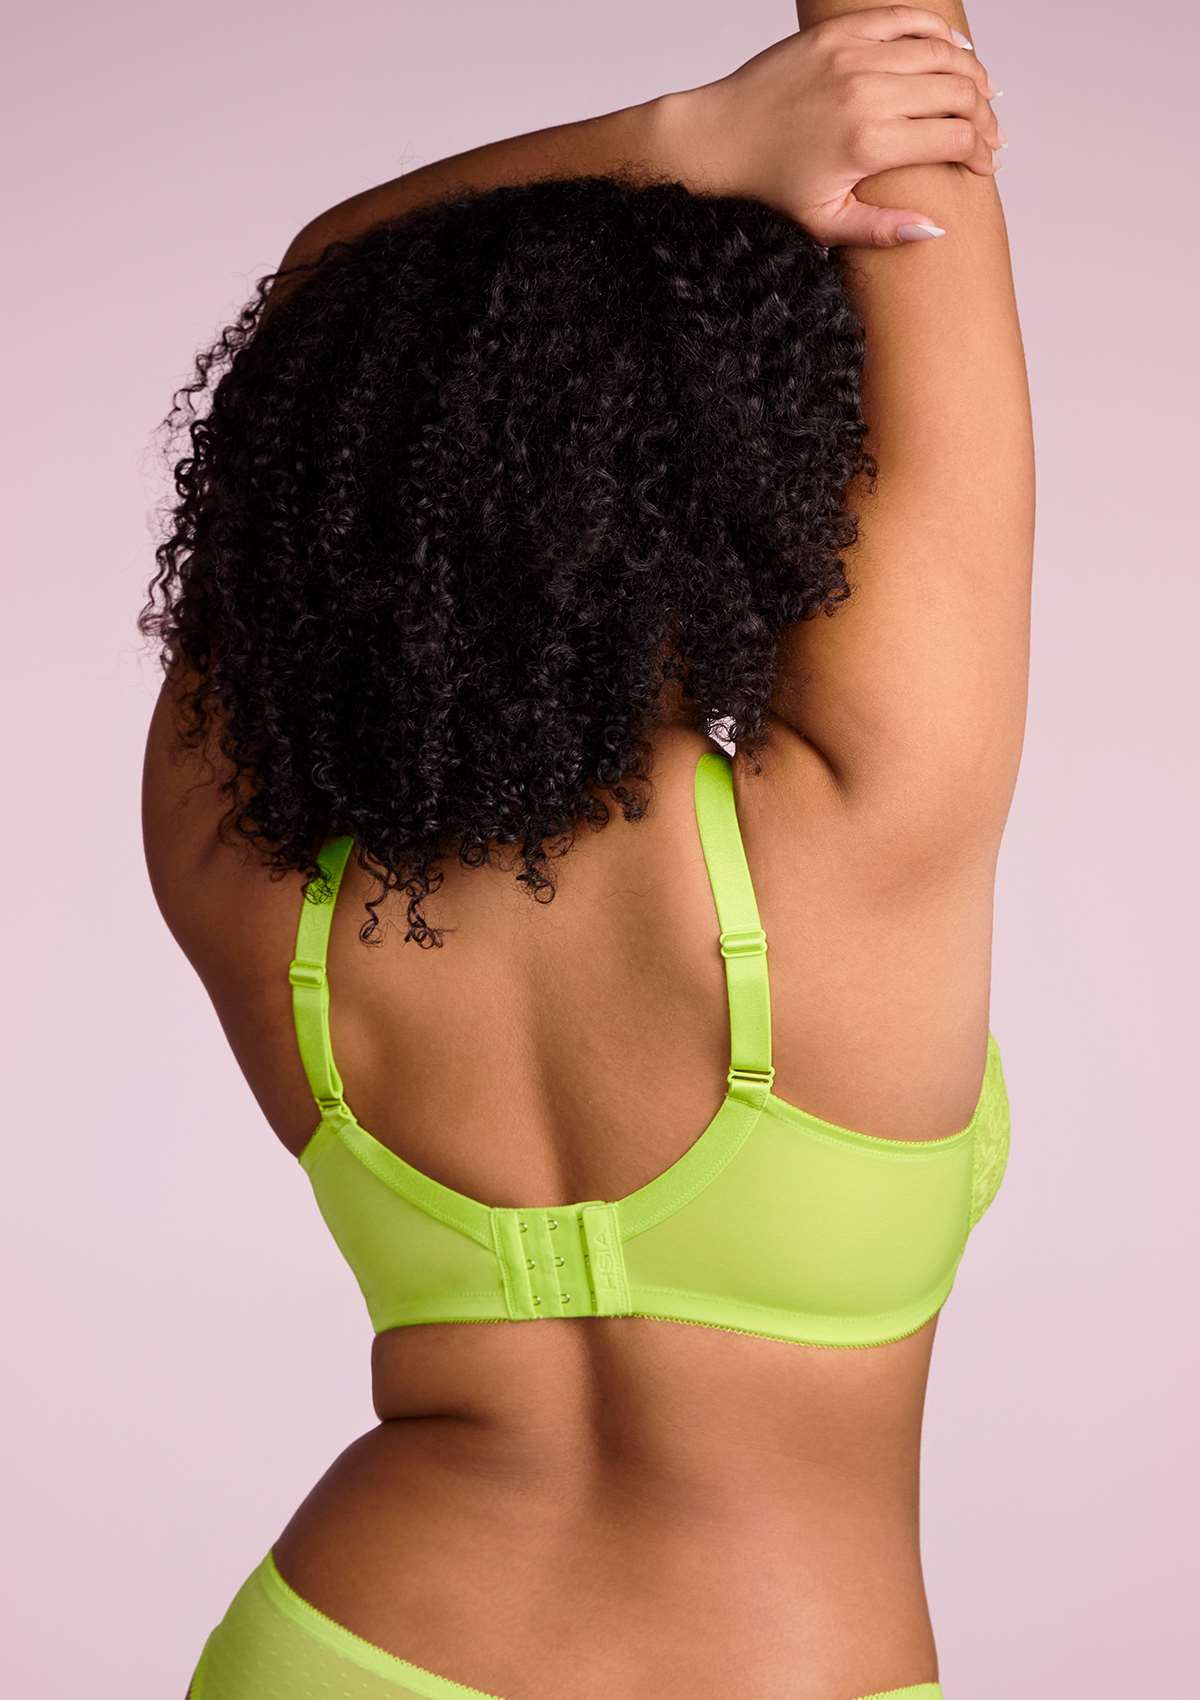 HSIA Enchante Full Cup Minimizing Bra: Supportive Unlined Lace Bra - Lime Green / 34 / DDD/F